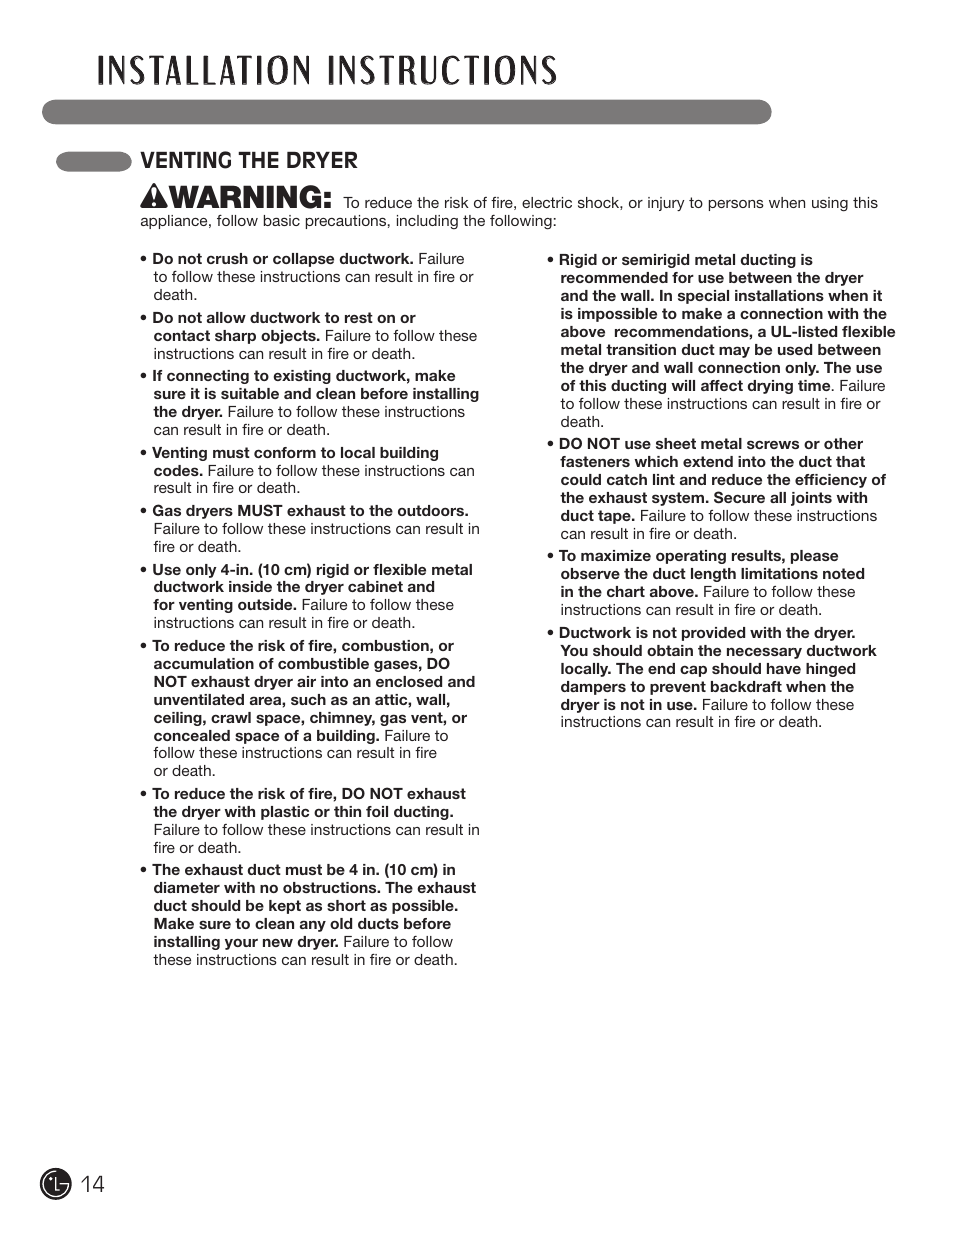 W warning, Venting the dryer | LG D5966W User Manual | Page 14 / 80